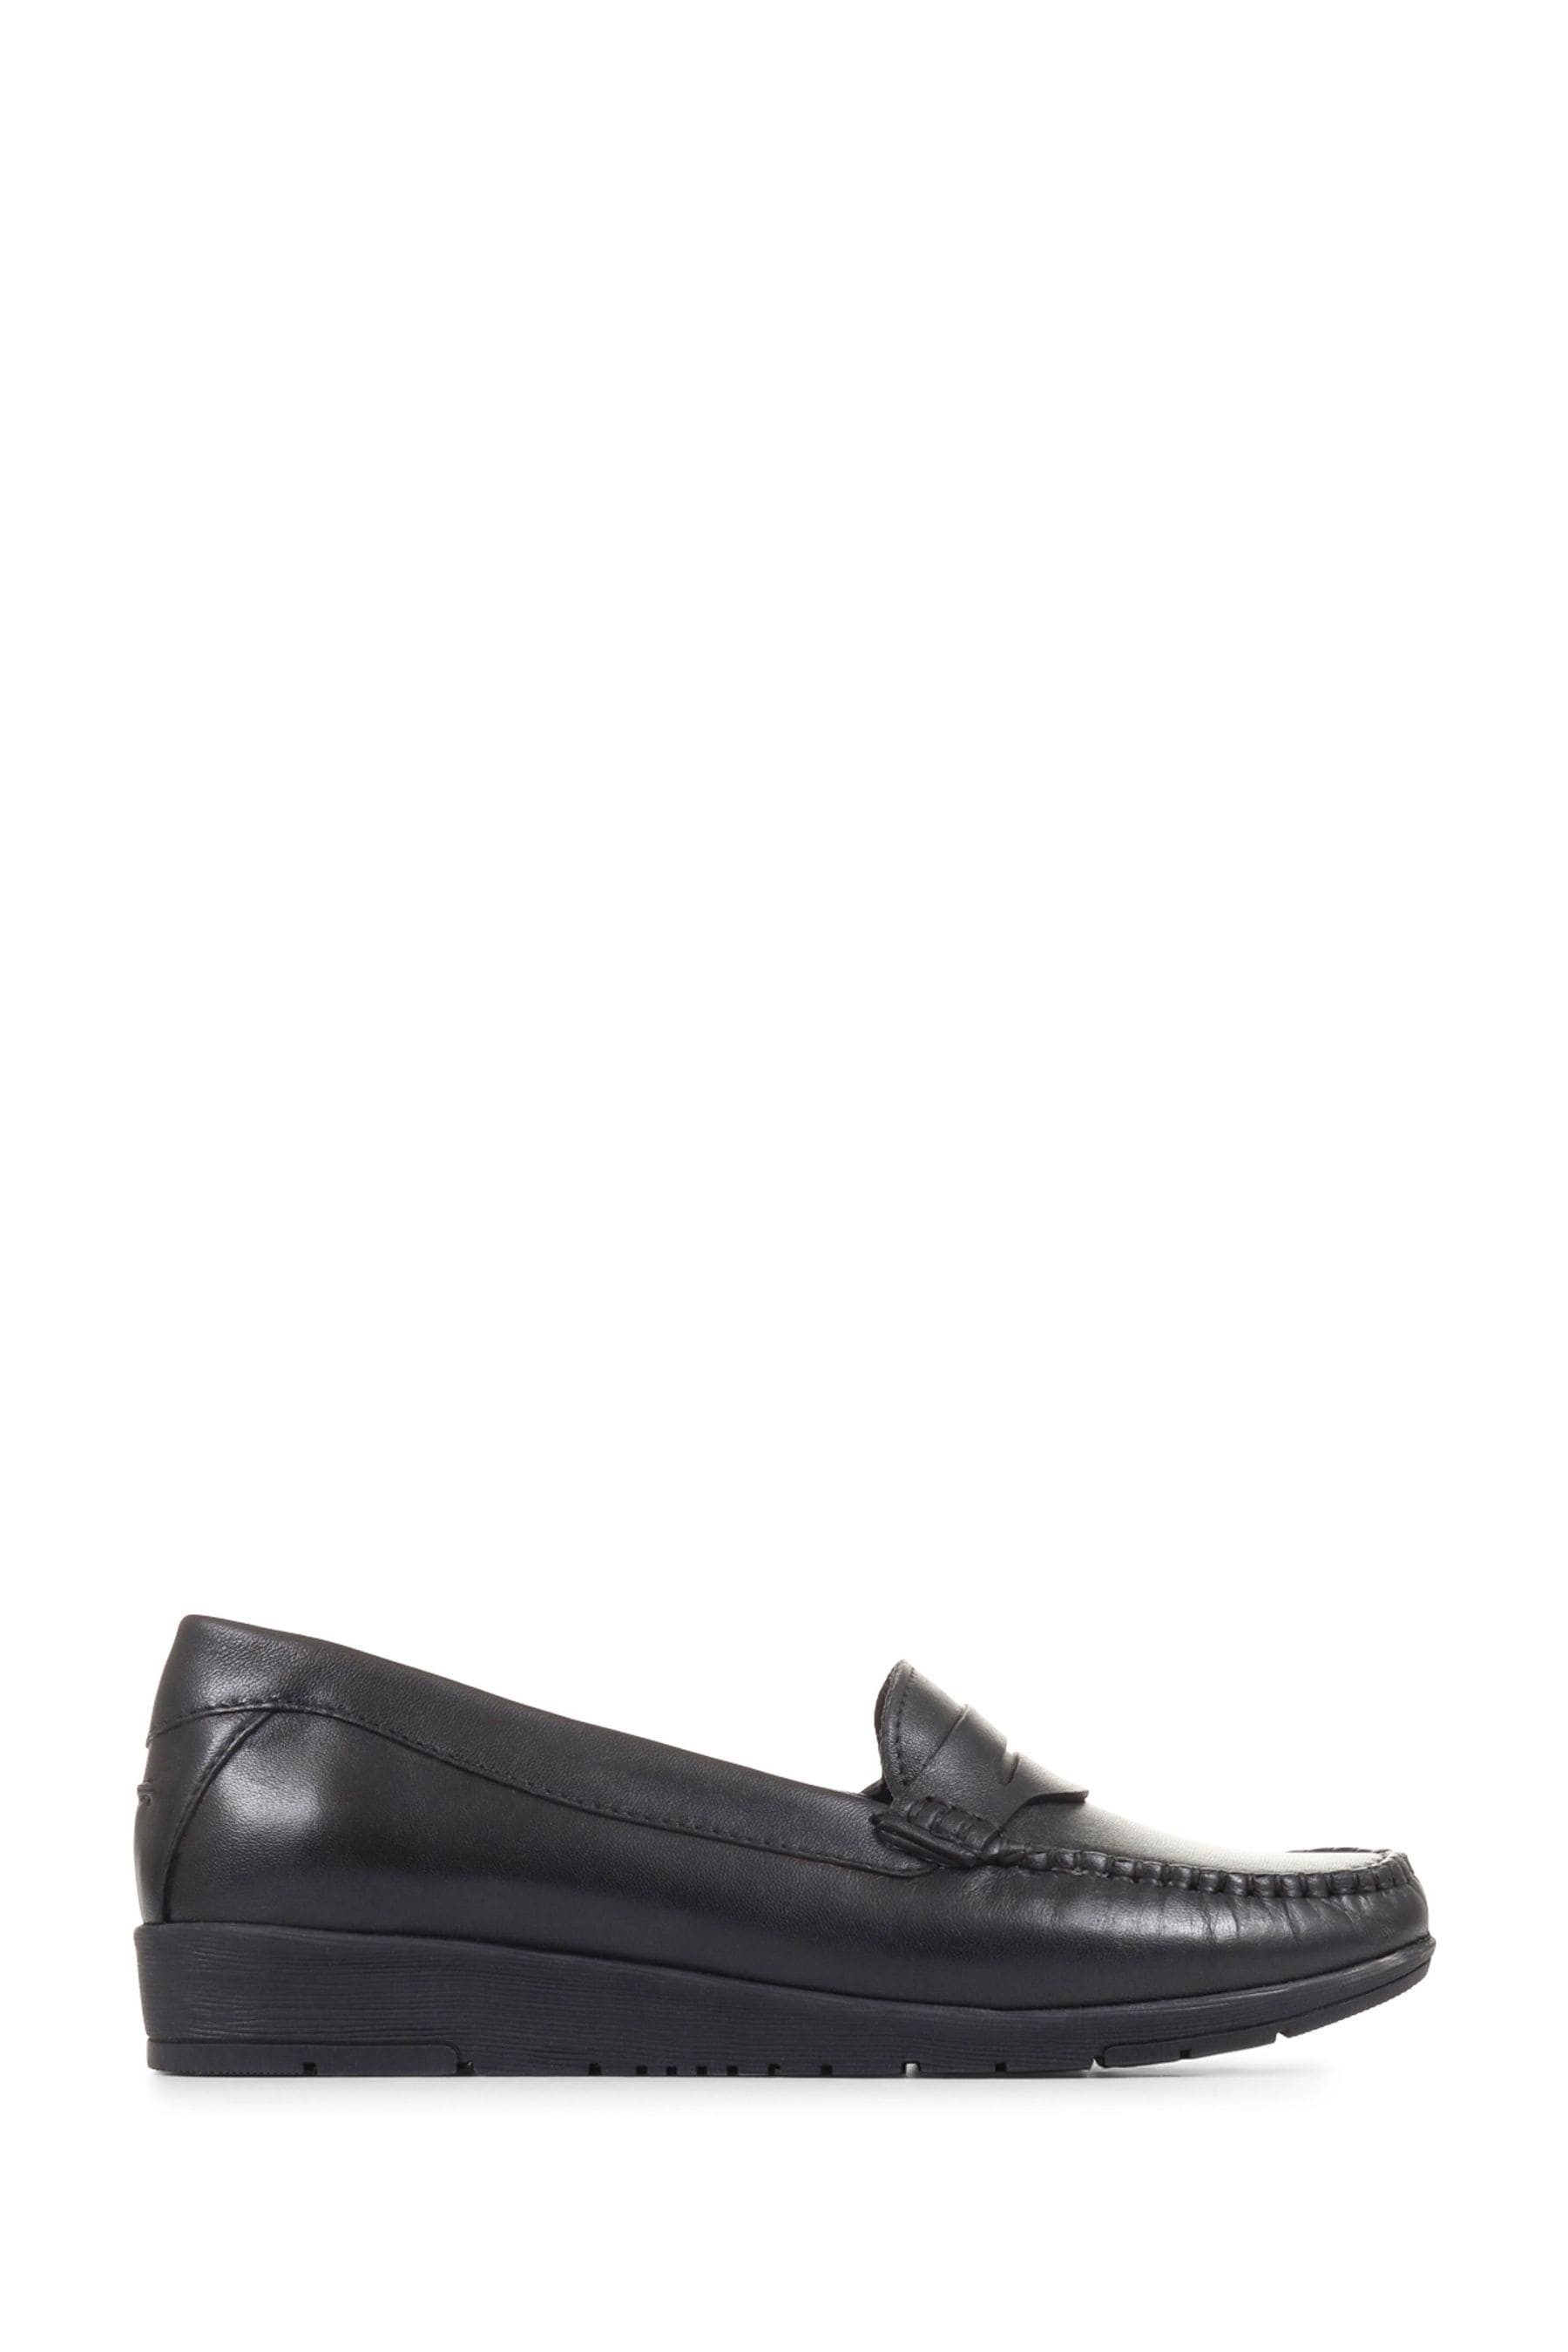 Buy Pavers Wide Fit Leather Penny Black Loafers from the Next UK online ...